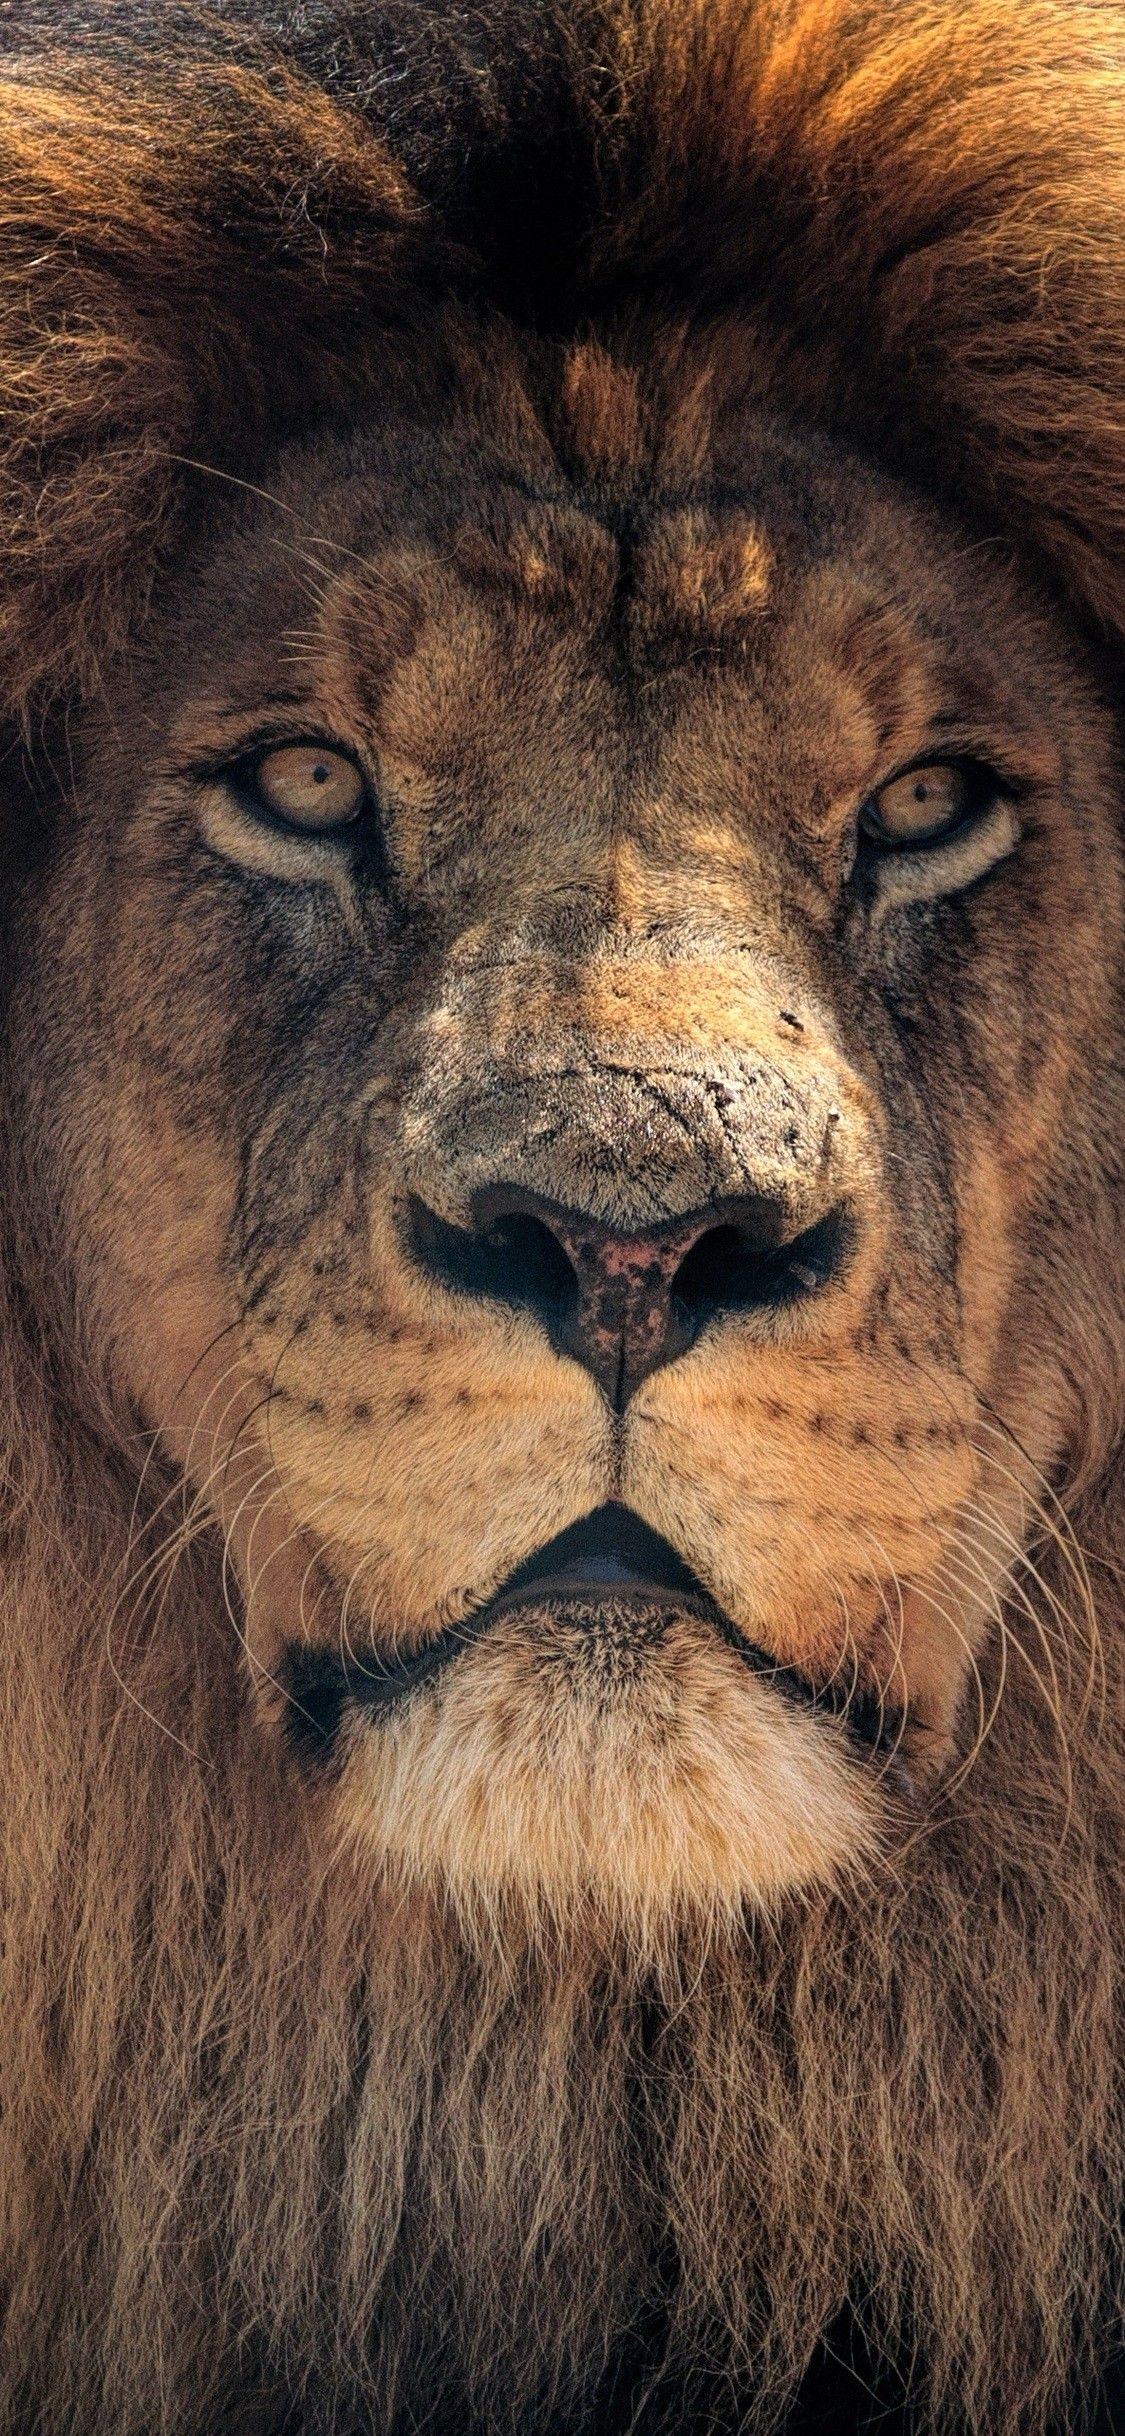 Lion iPhone X Wallpapers - Top Free ...